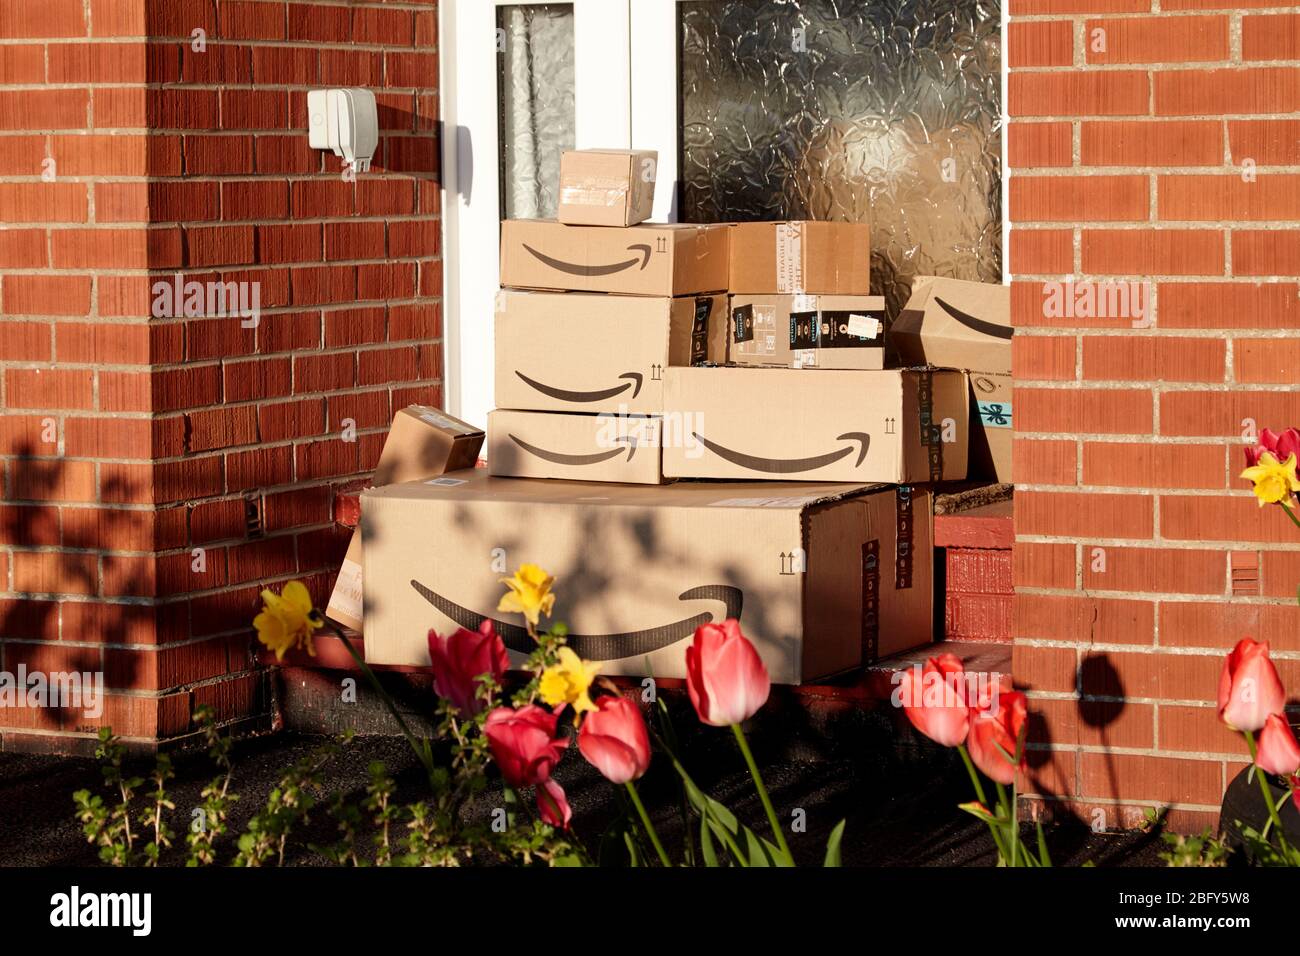 large consignment of amazon deliveries left on doorstep of house during coronavirus covid-19 lockdown in the uk Stock Photo